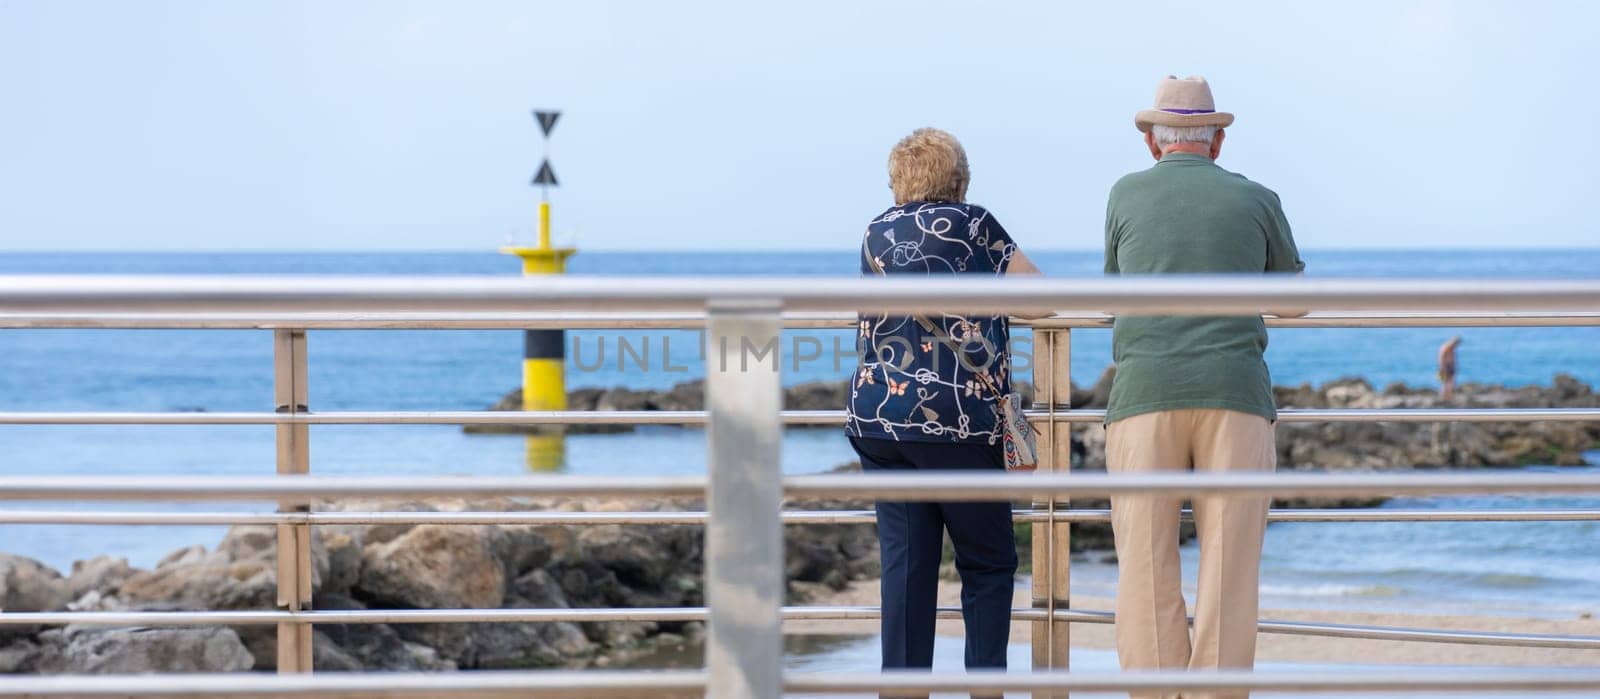 Timeless Moments by the Sea: Elderly Couple Contemplating the Ocean View by Juanjo39